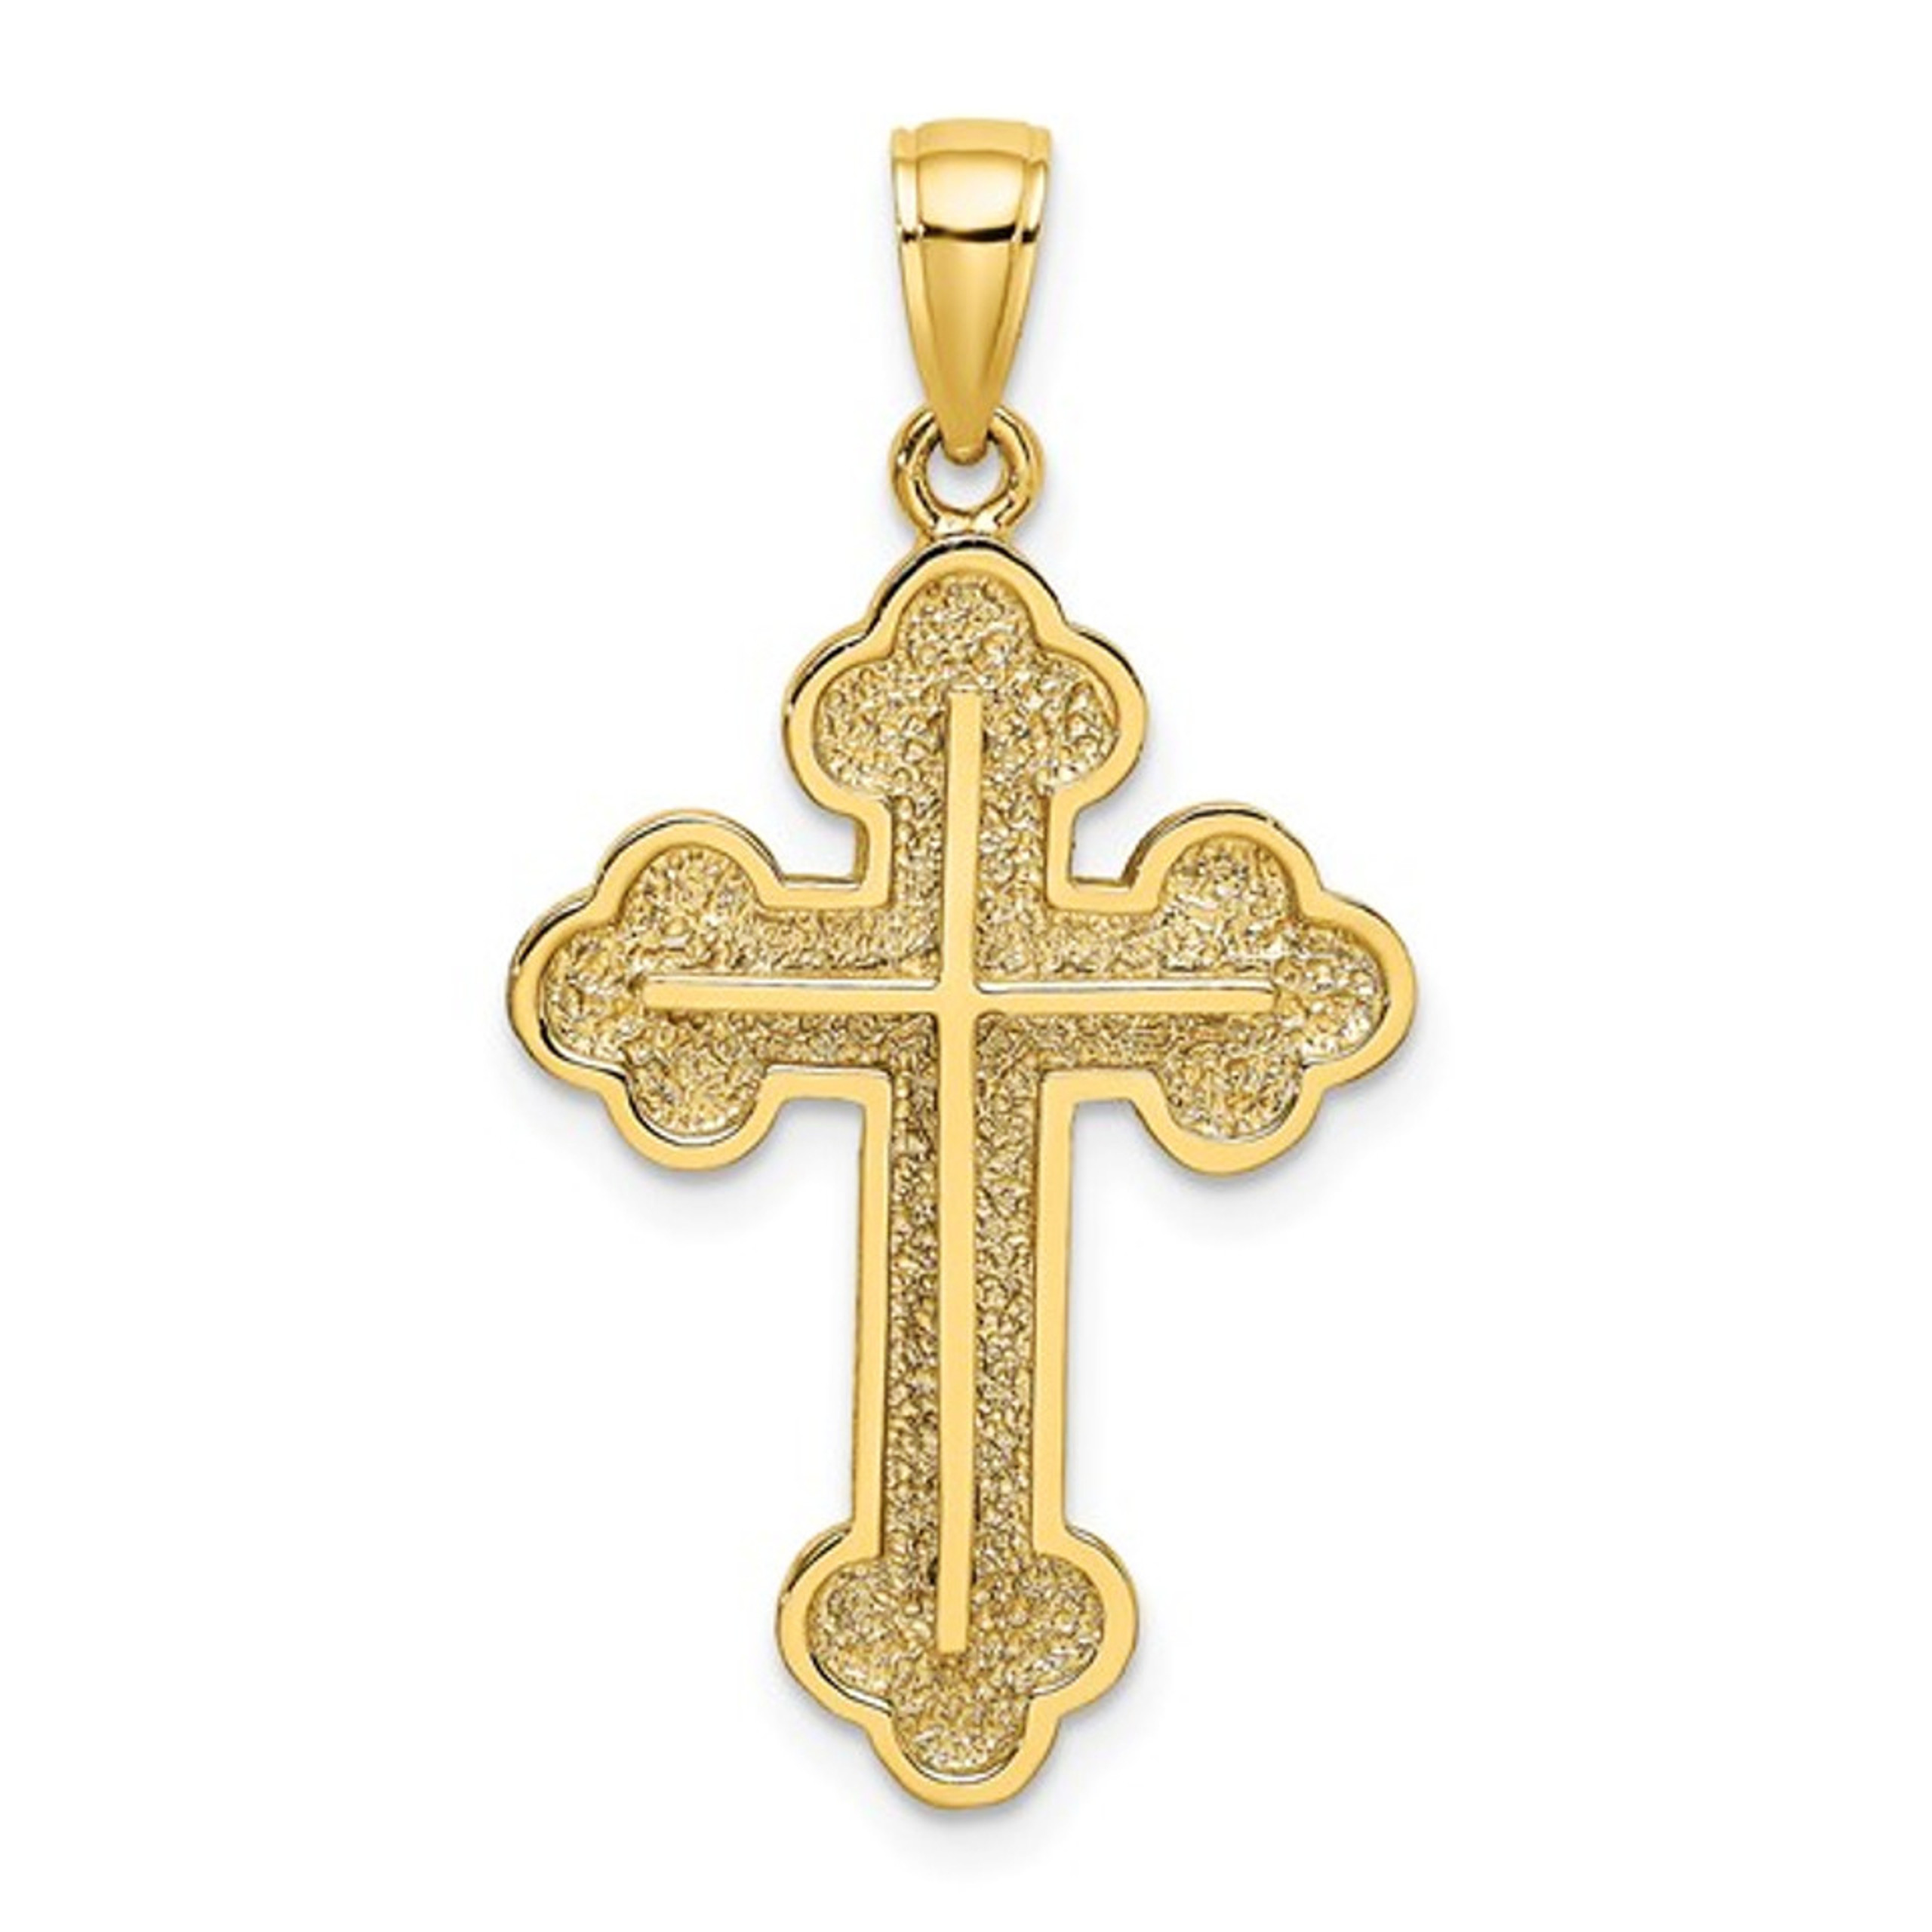 SHOP BY CATEGORY - ♥ Crosses & Chains - Page 1 - OrthodoxGifts.com